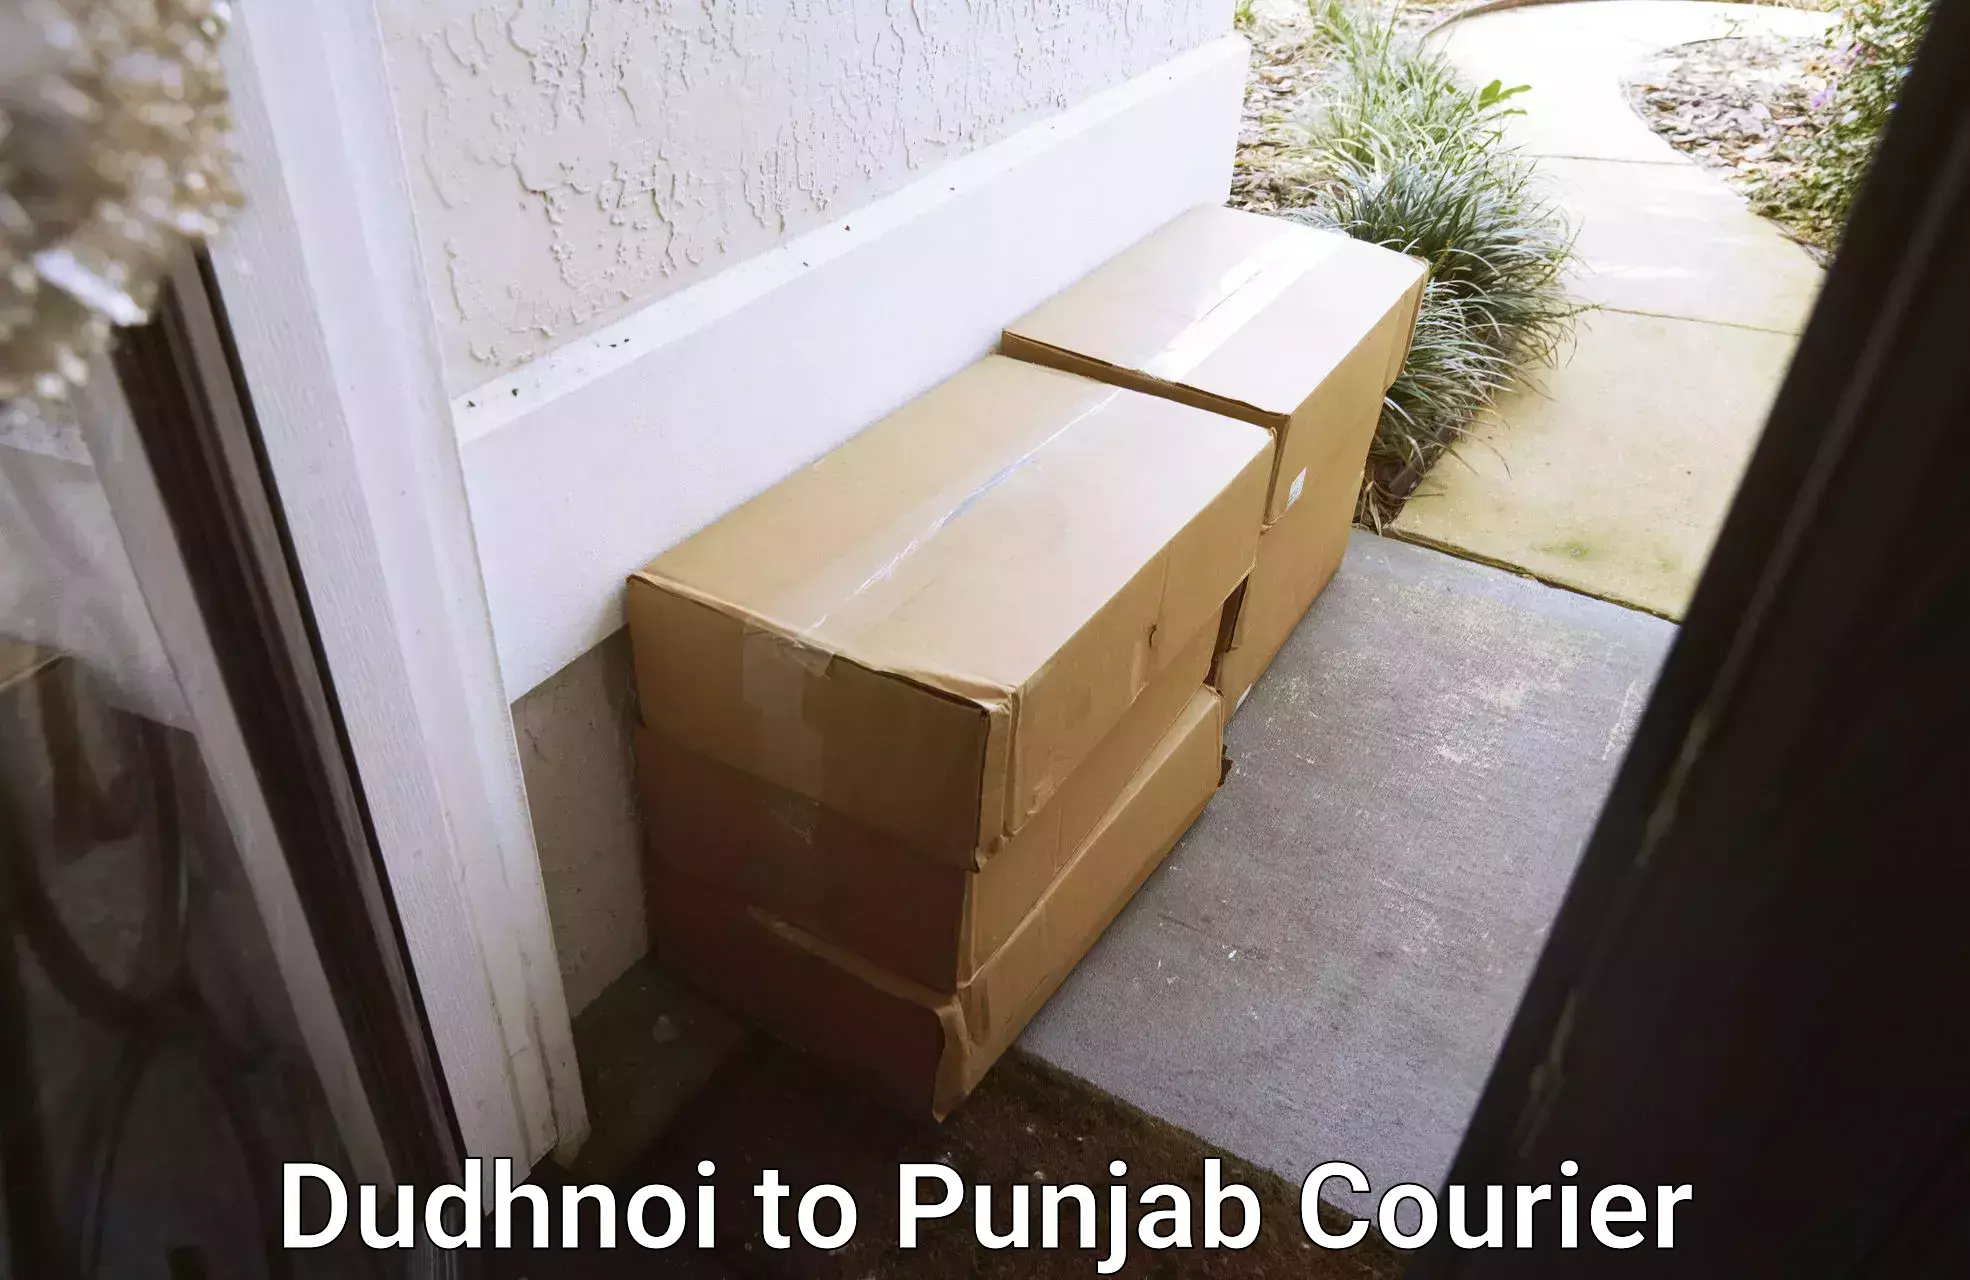 Secure packaging in Dudhnoi to Mohali